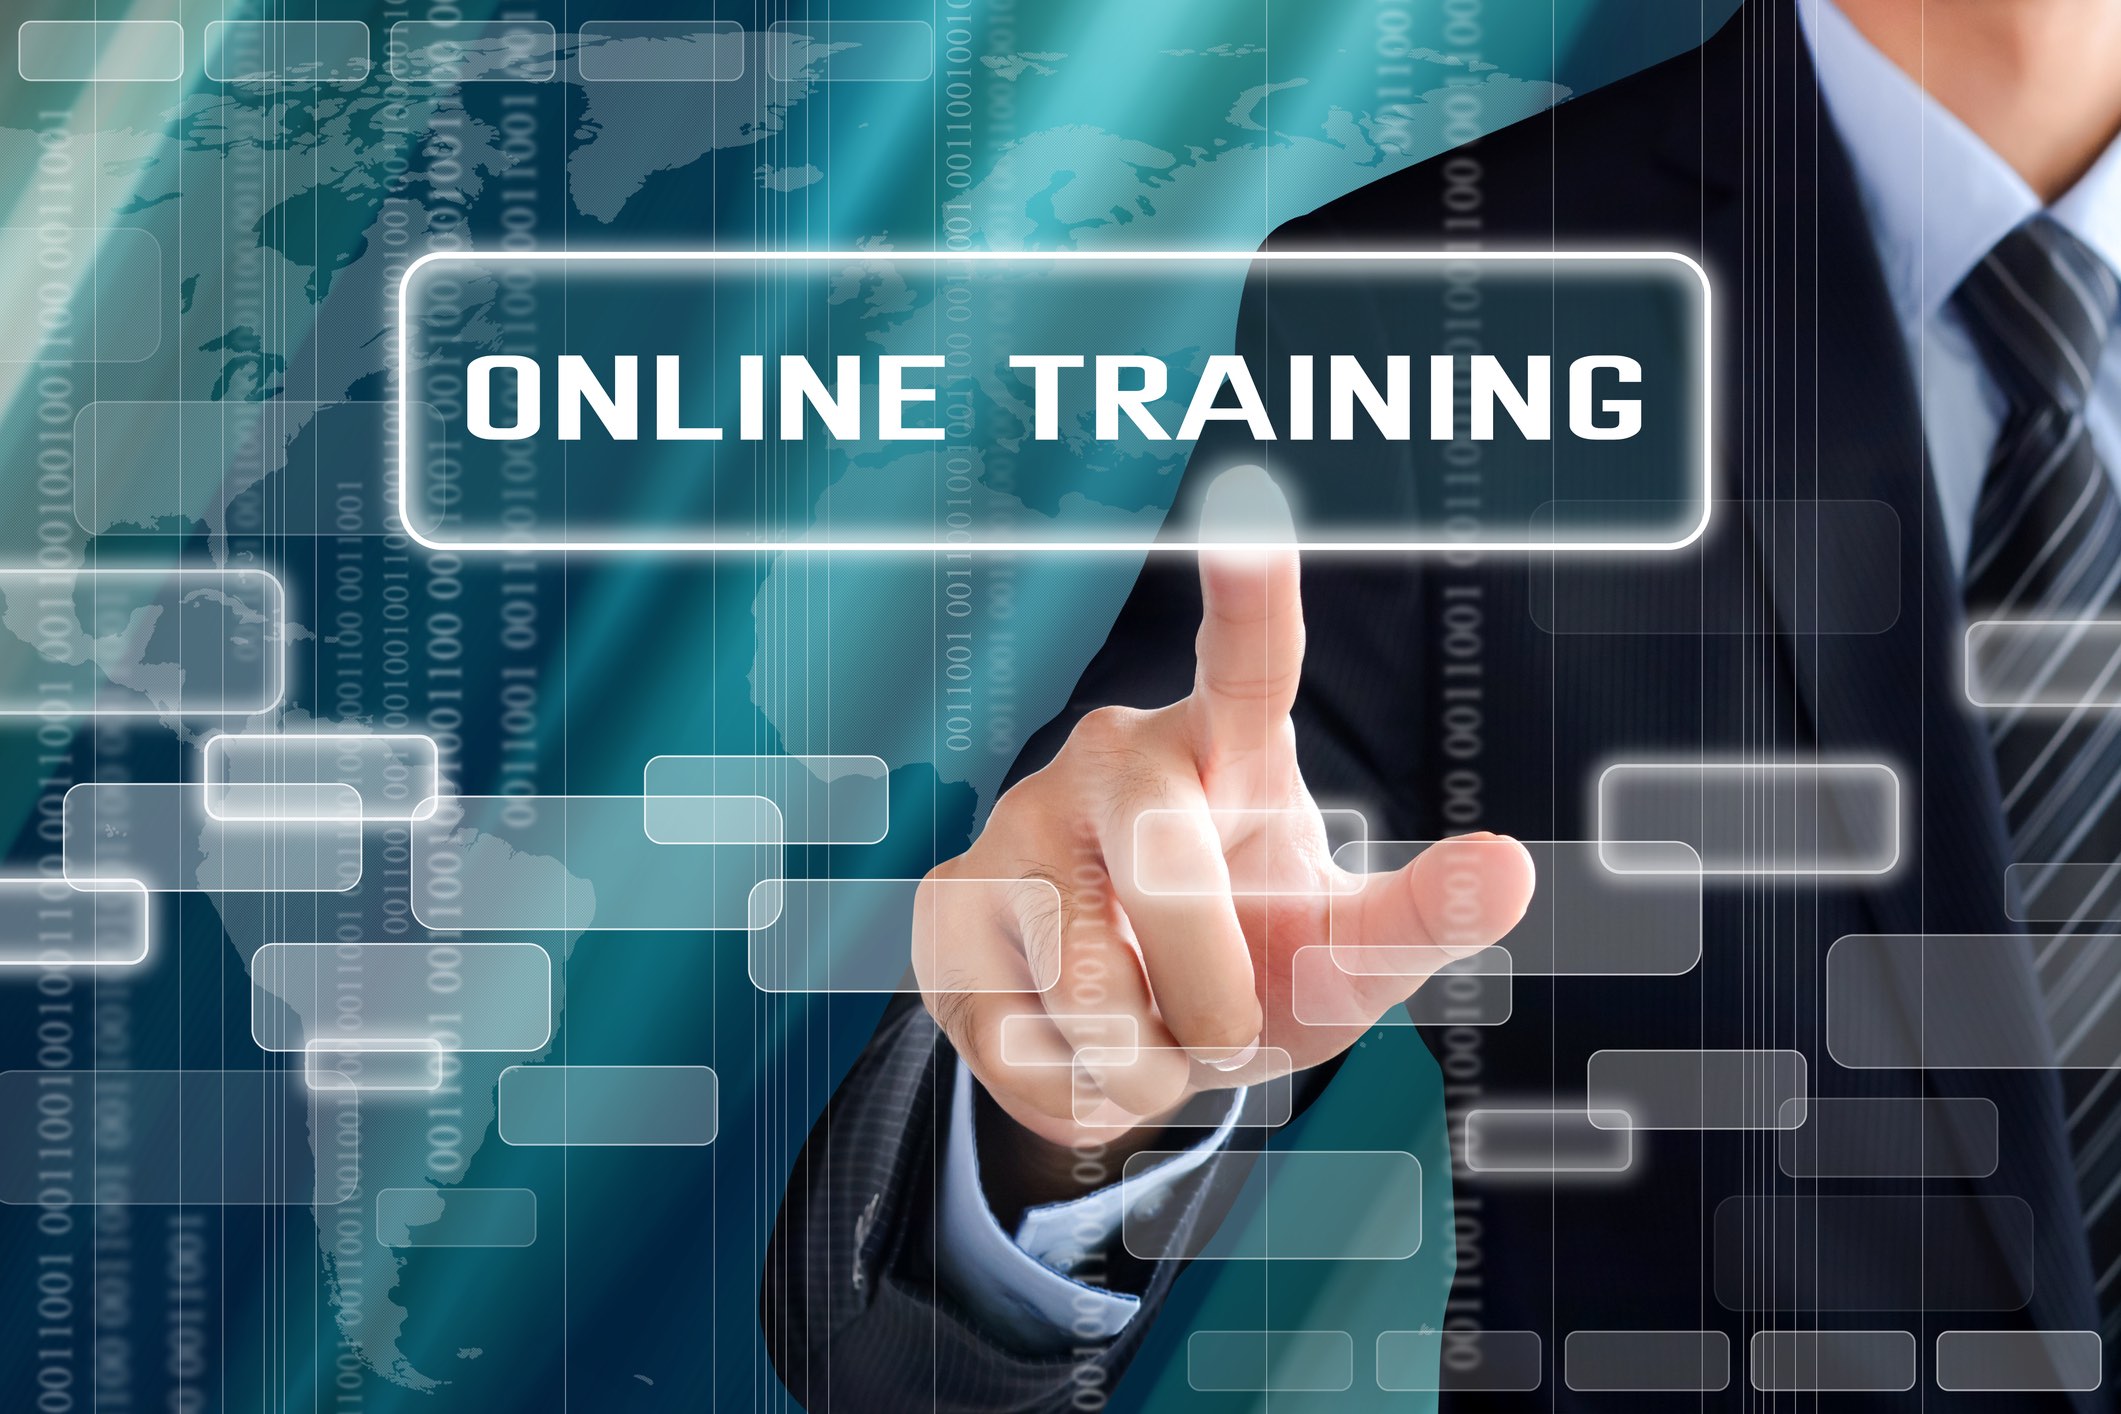 How to Take Advantage of Online Training Tools